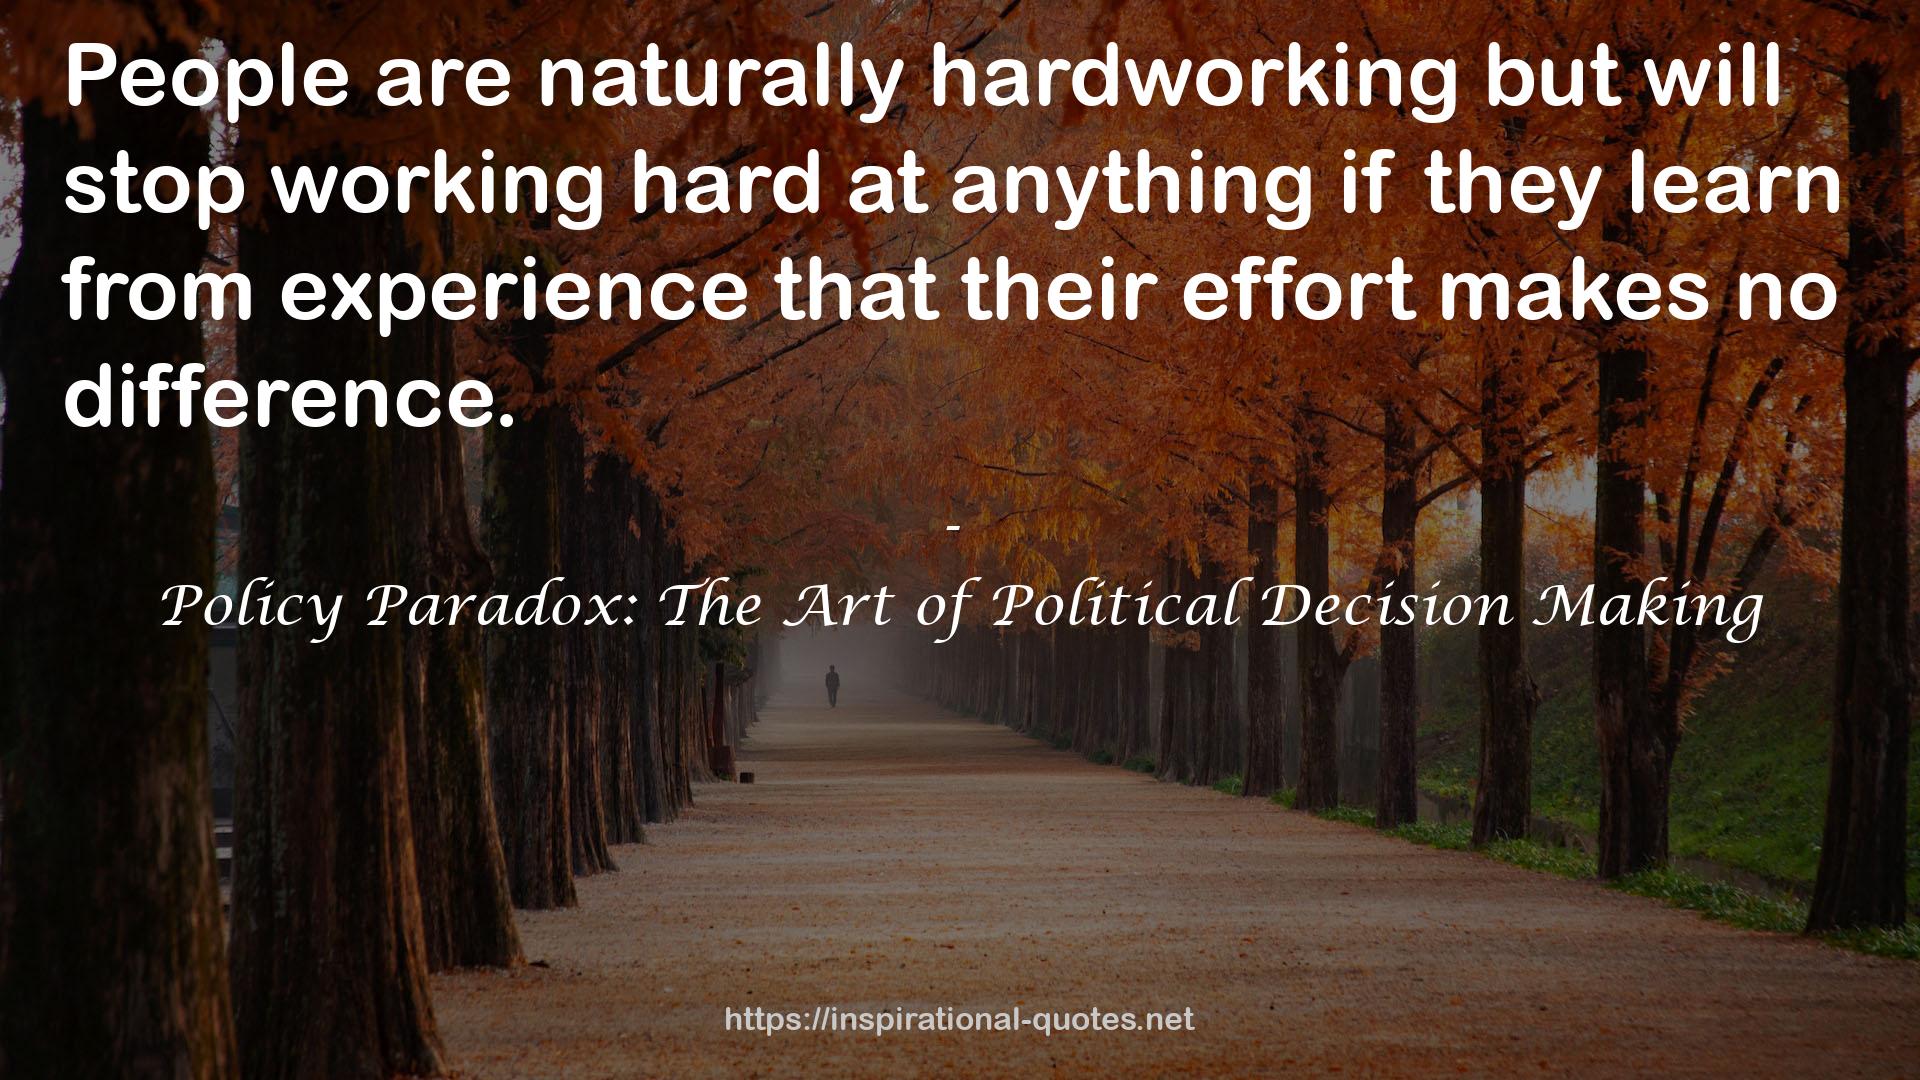 Policy Paradox: The Art of Political Decision Making QUOTES